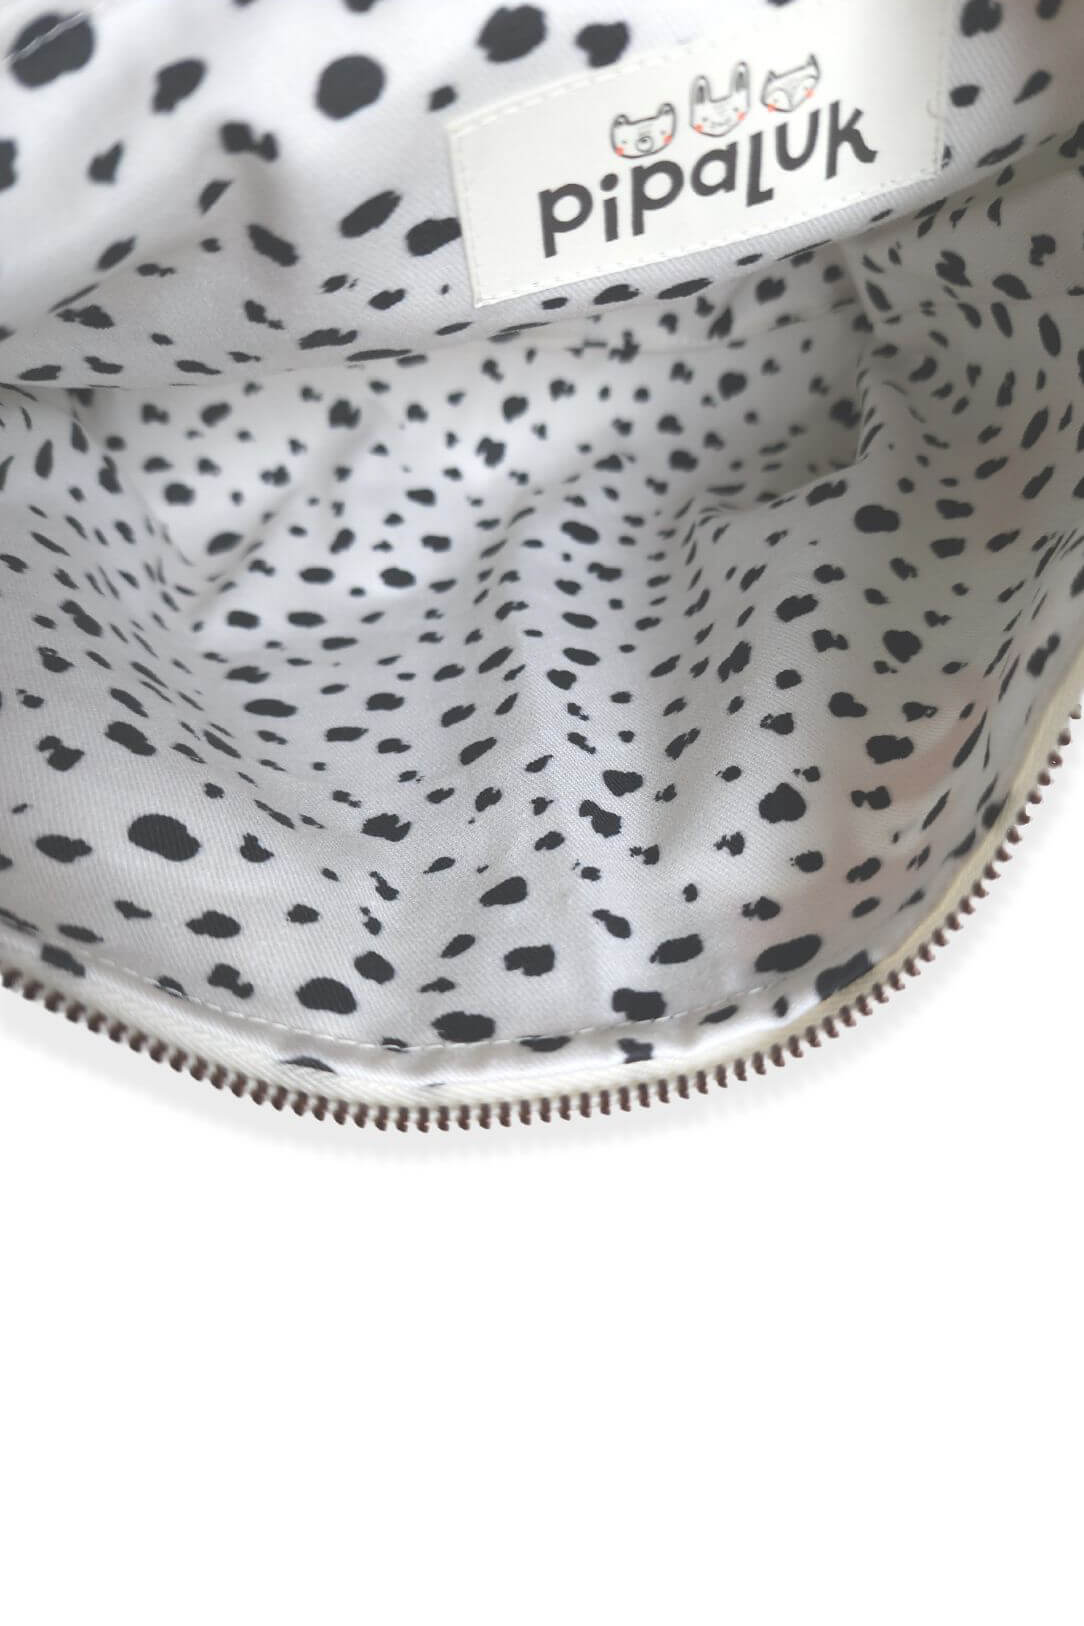 inner lining of zipper pouch showing black and white speckled fabric